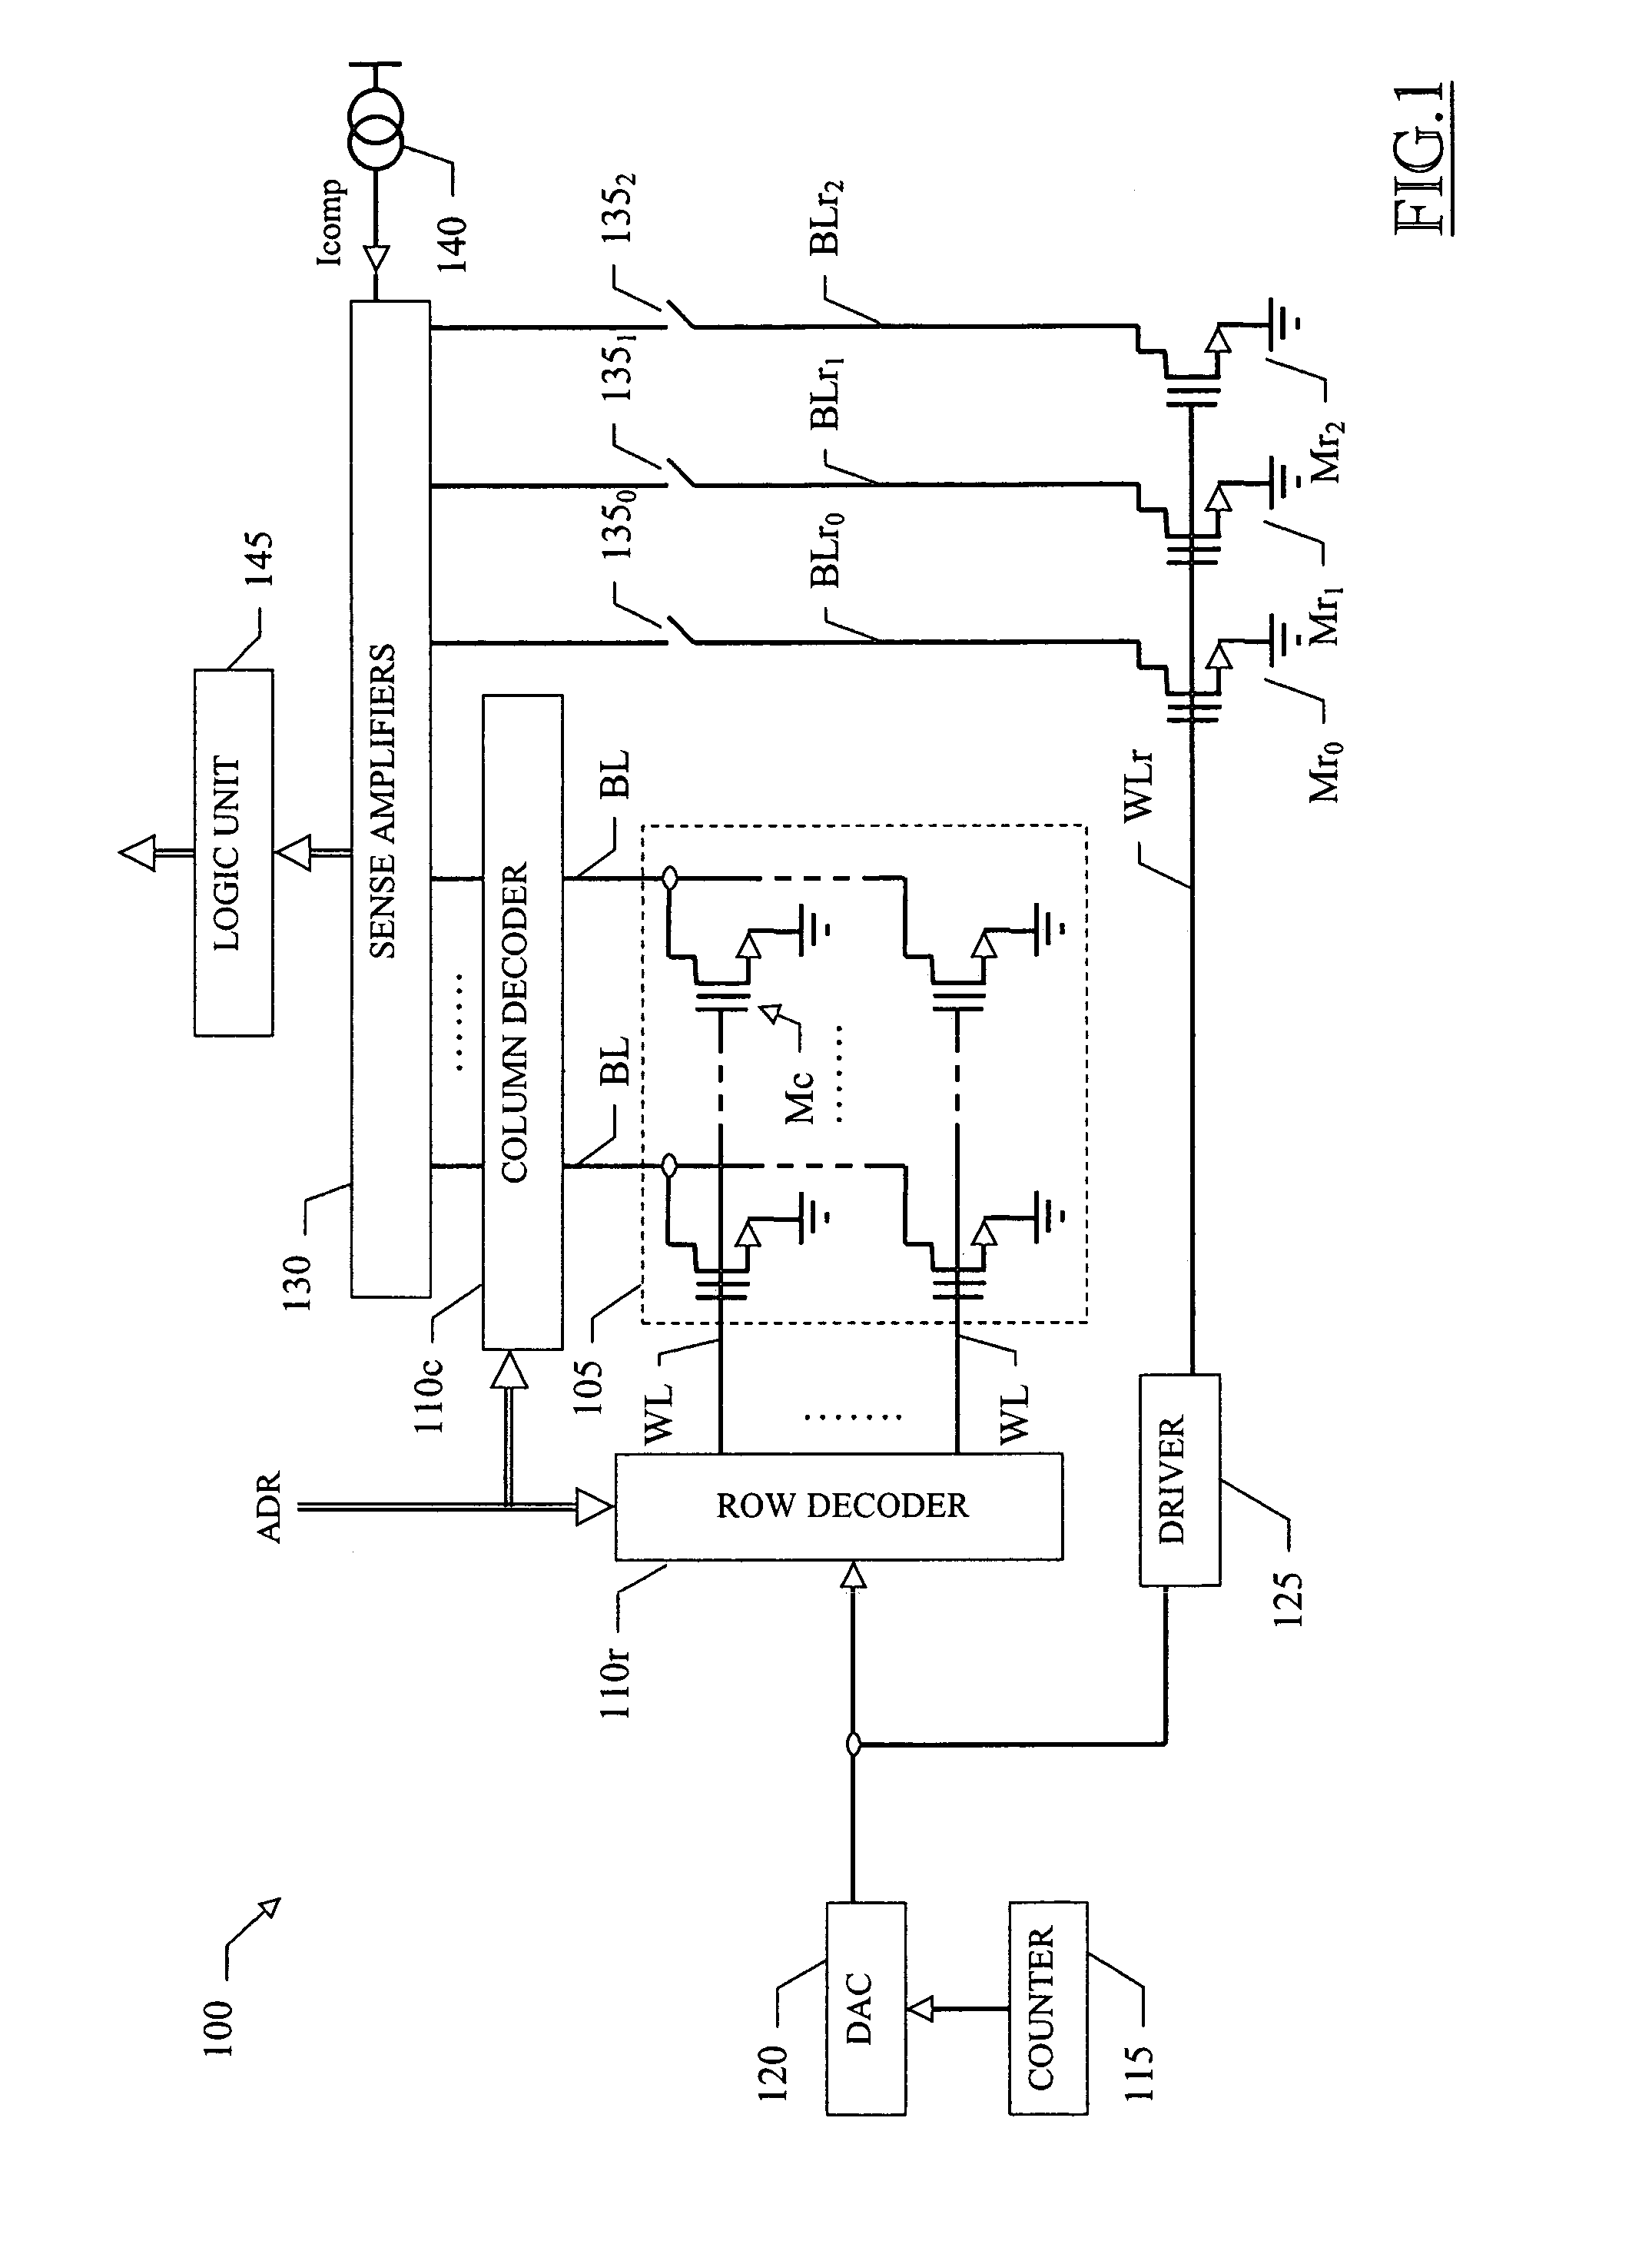 Memory device with time-shifting based emulation of reference cells